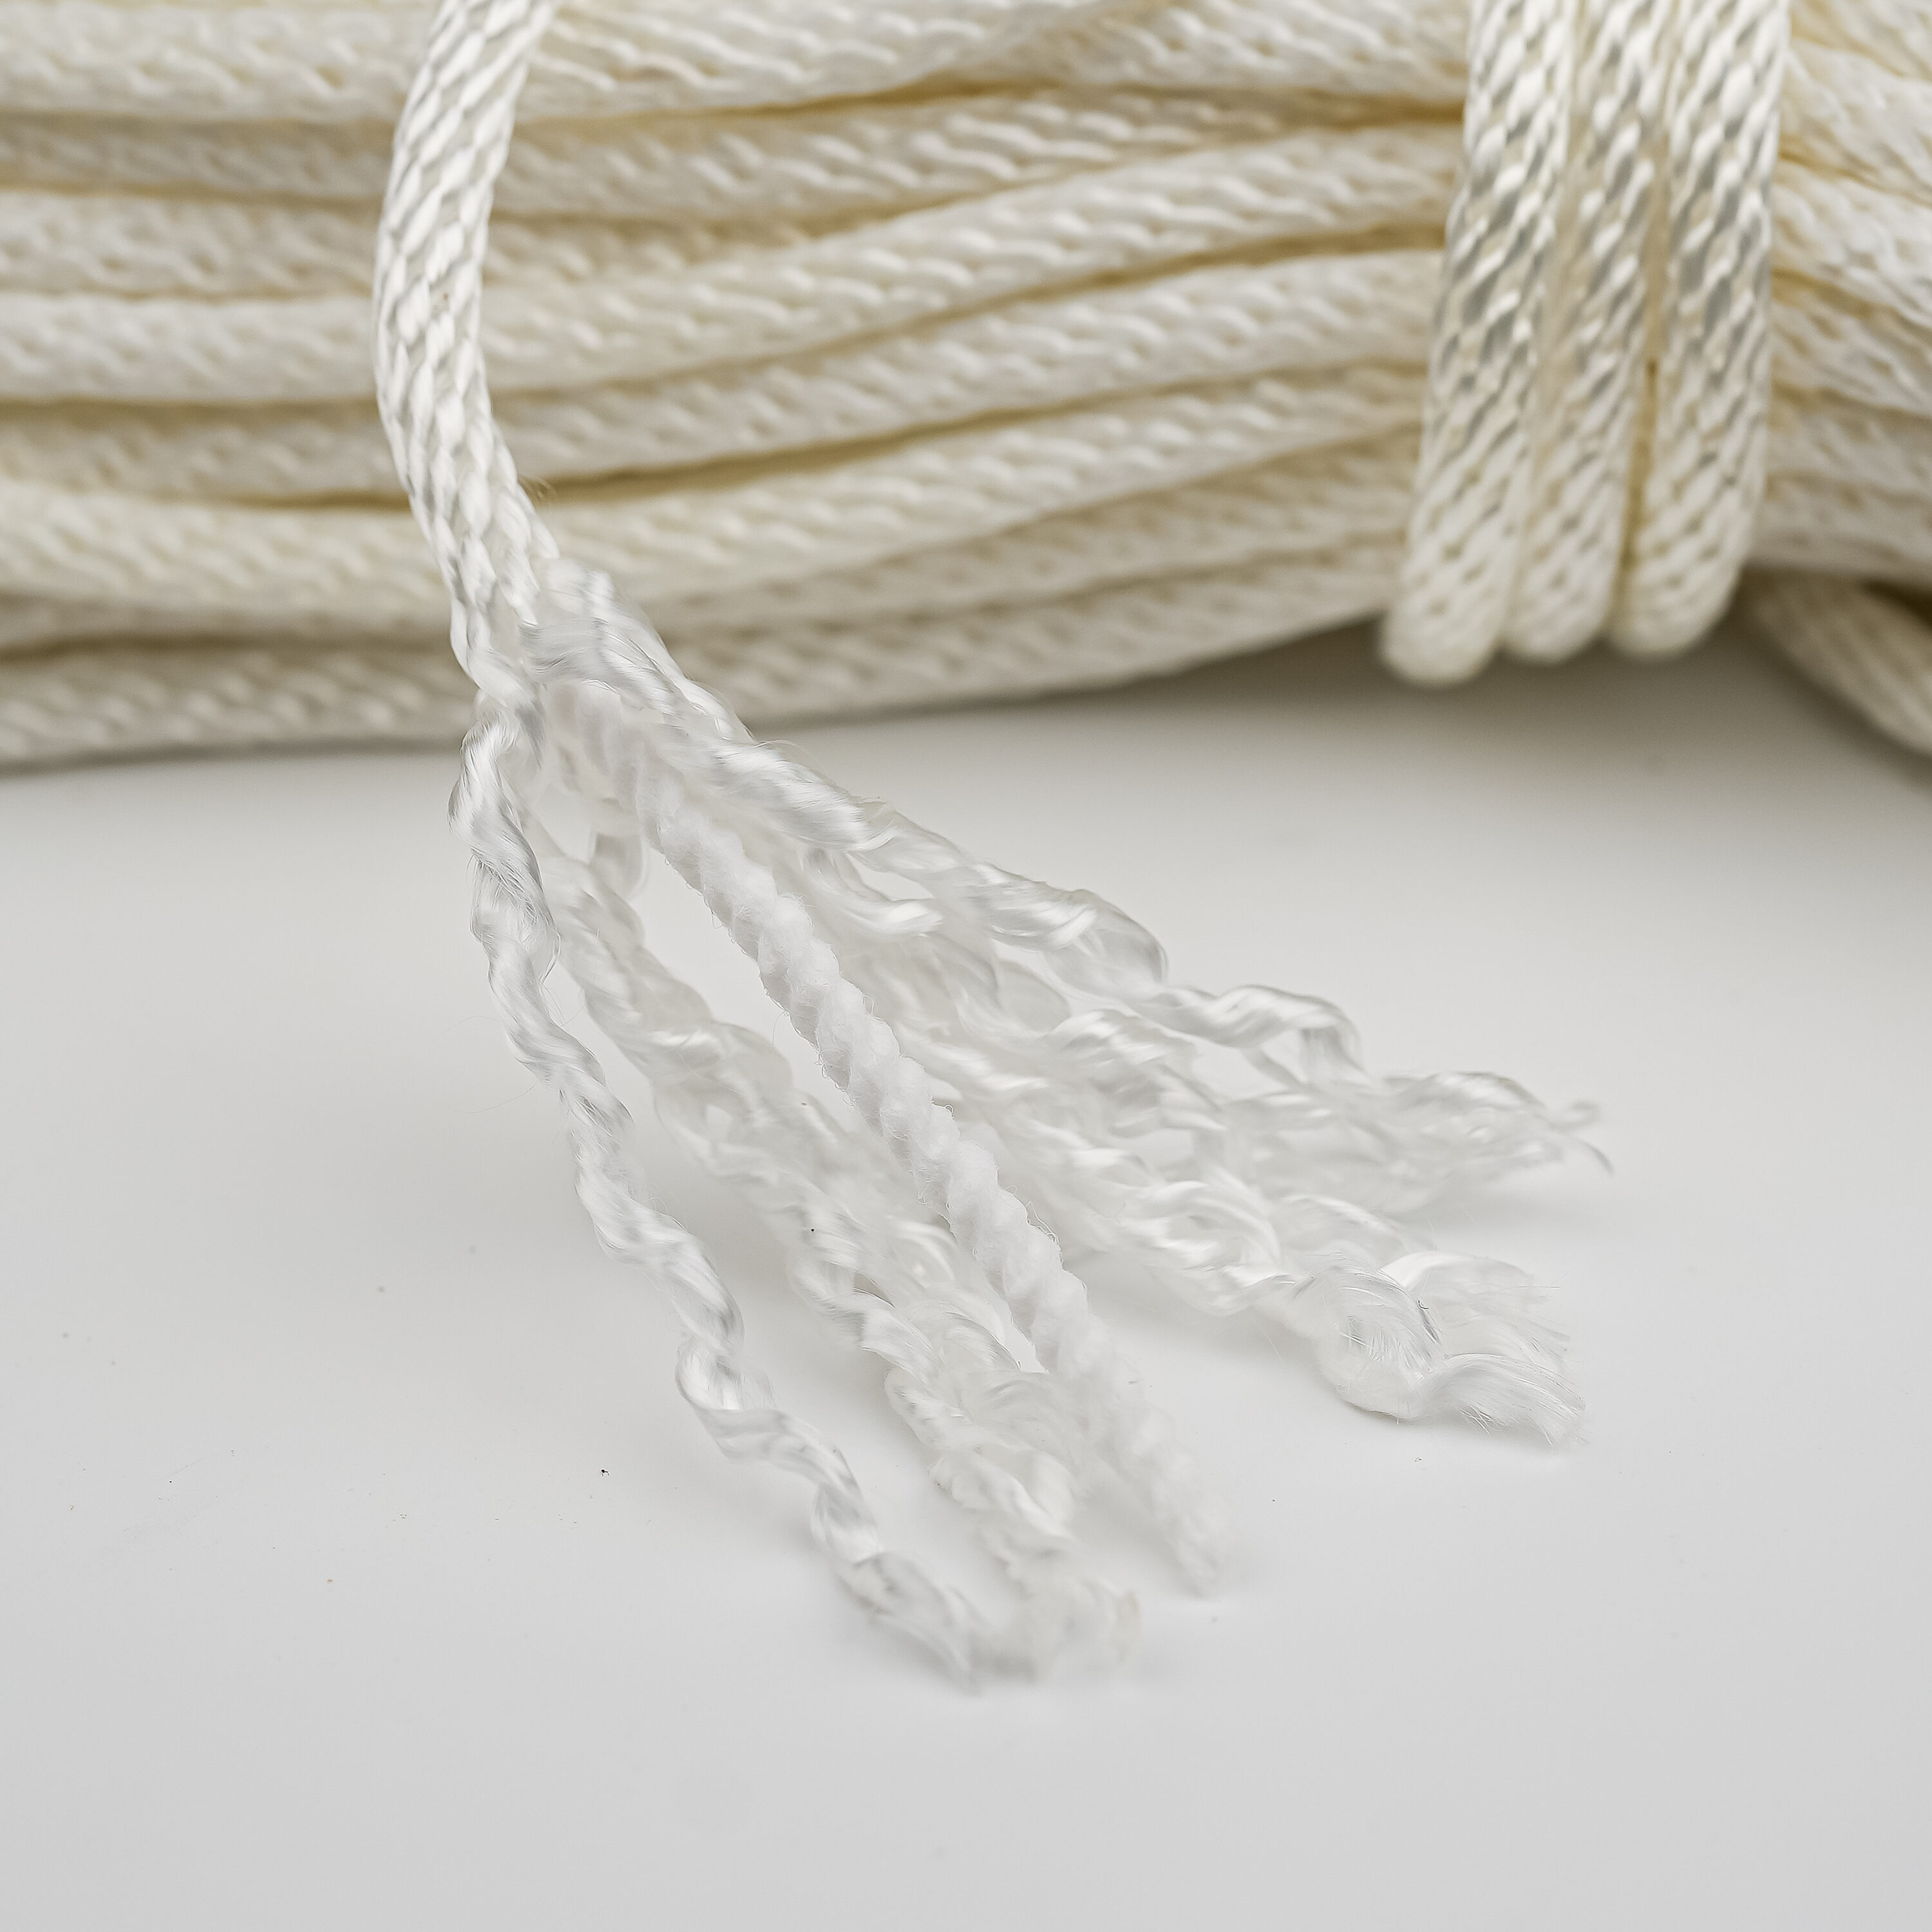 Blue Hawk 0.2188-in x 50-ft Braided Cotton Rope (By-the-Roll) in the Rope  (By-the-Roll) department at